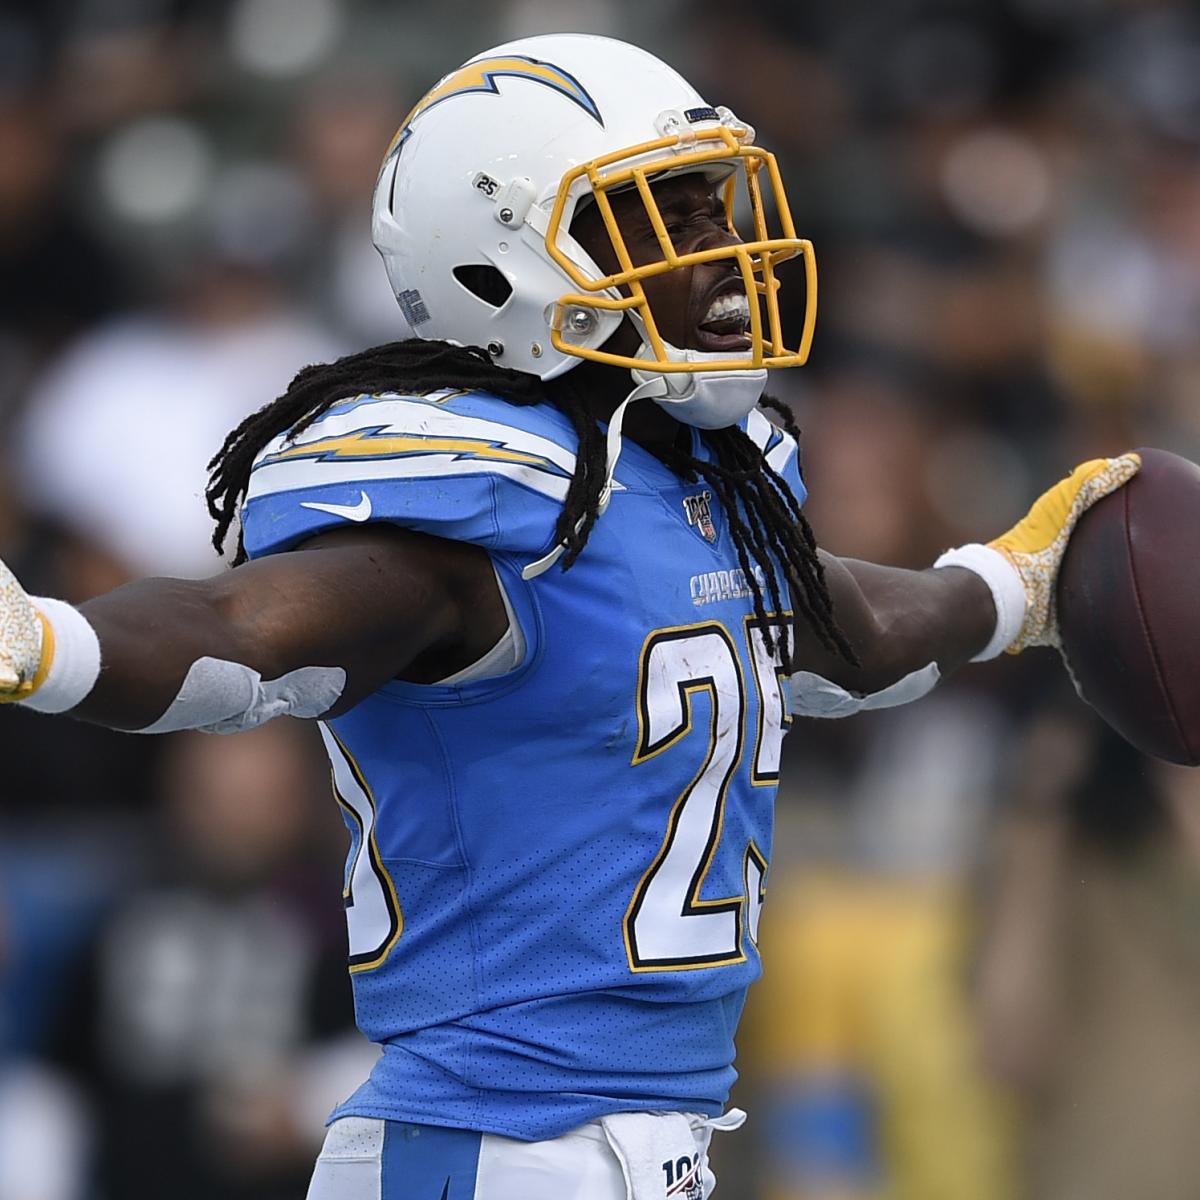 37 Best Pictures Bleacher Report Fantasy Football 2020 : Fantasy Football 2020: Sleeper Wide Receivers to Target in ...